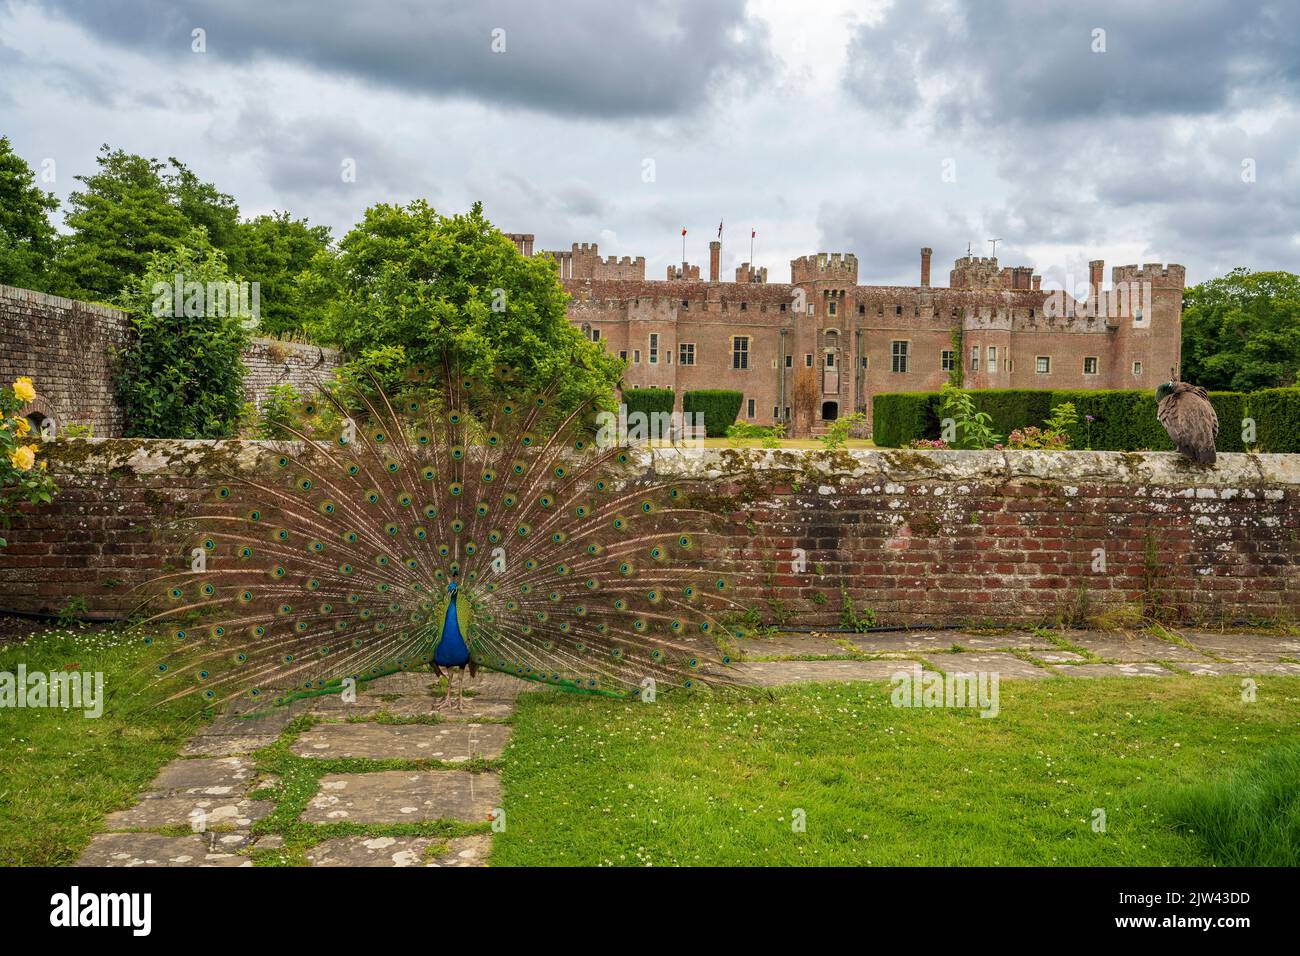 A Peacock and Peahen roam around the gardens of Herstmonceux Castle, Herstmonceux, East Sussex, England, Uk Stock Photo